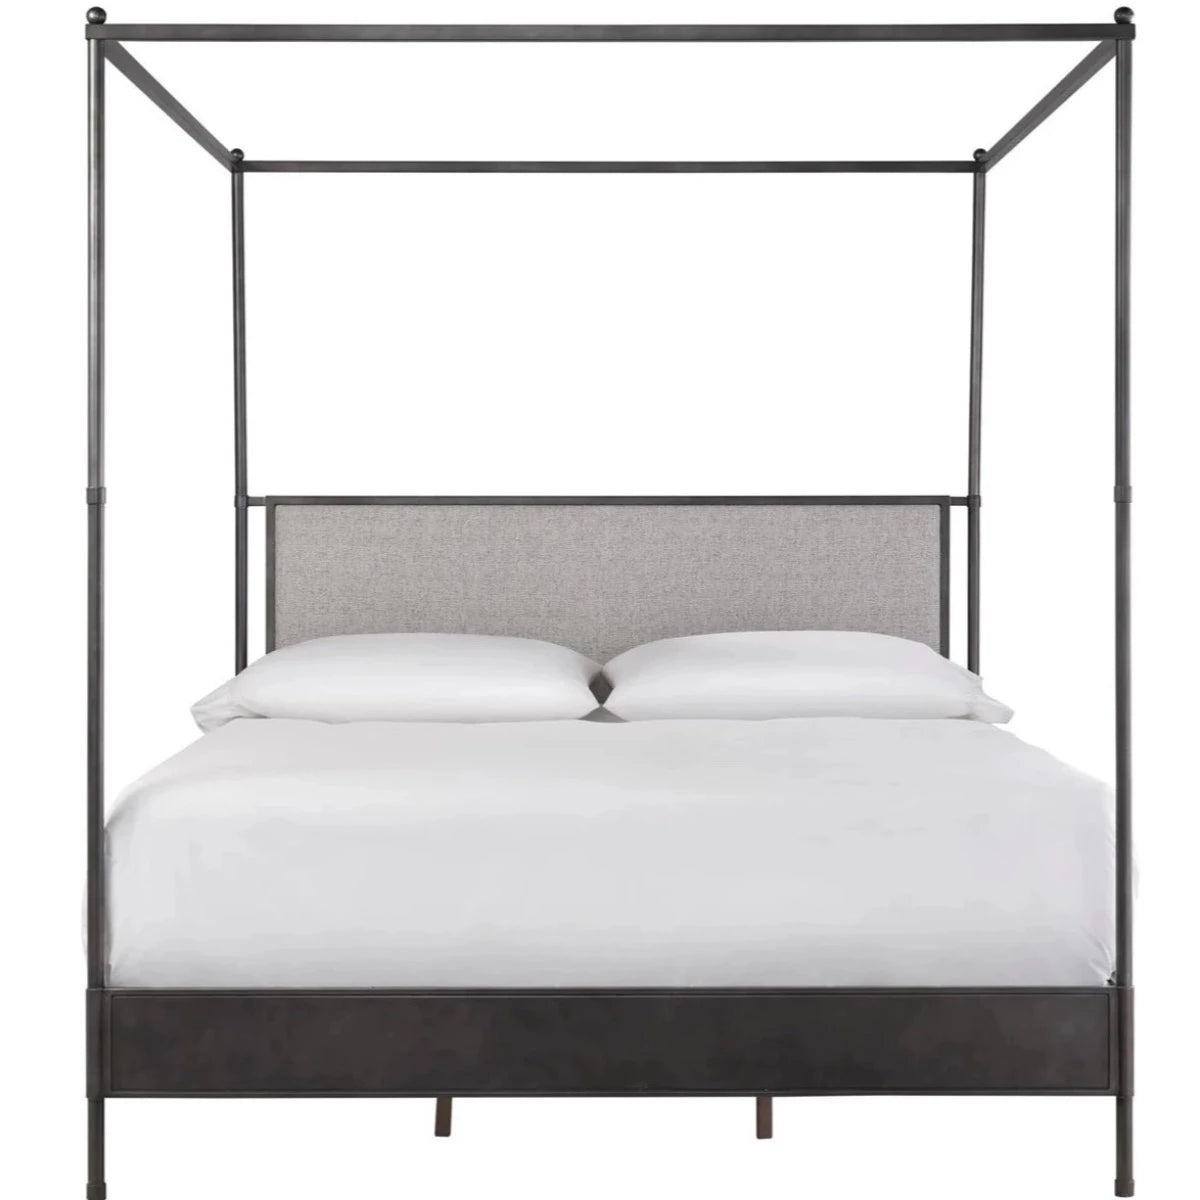 Midtown Bed Frame - Queen. Front view.